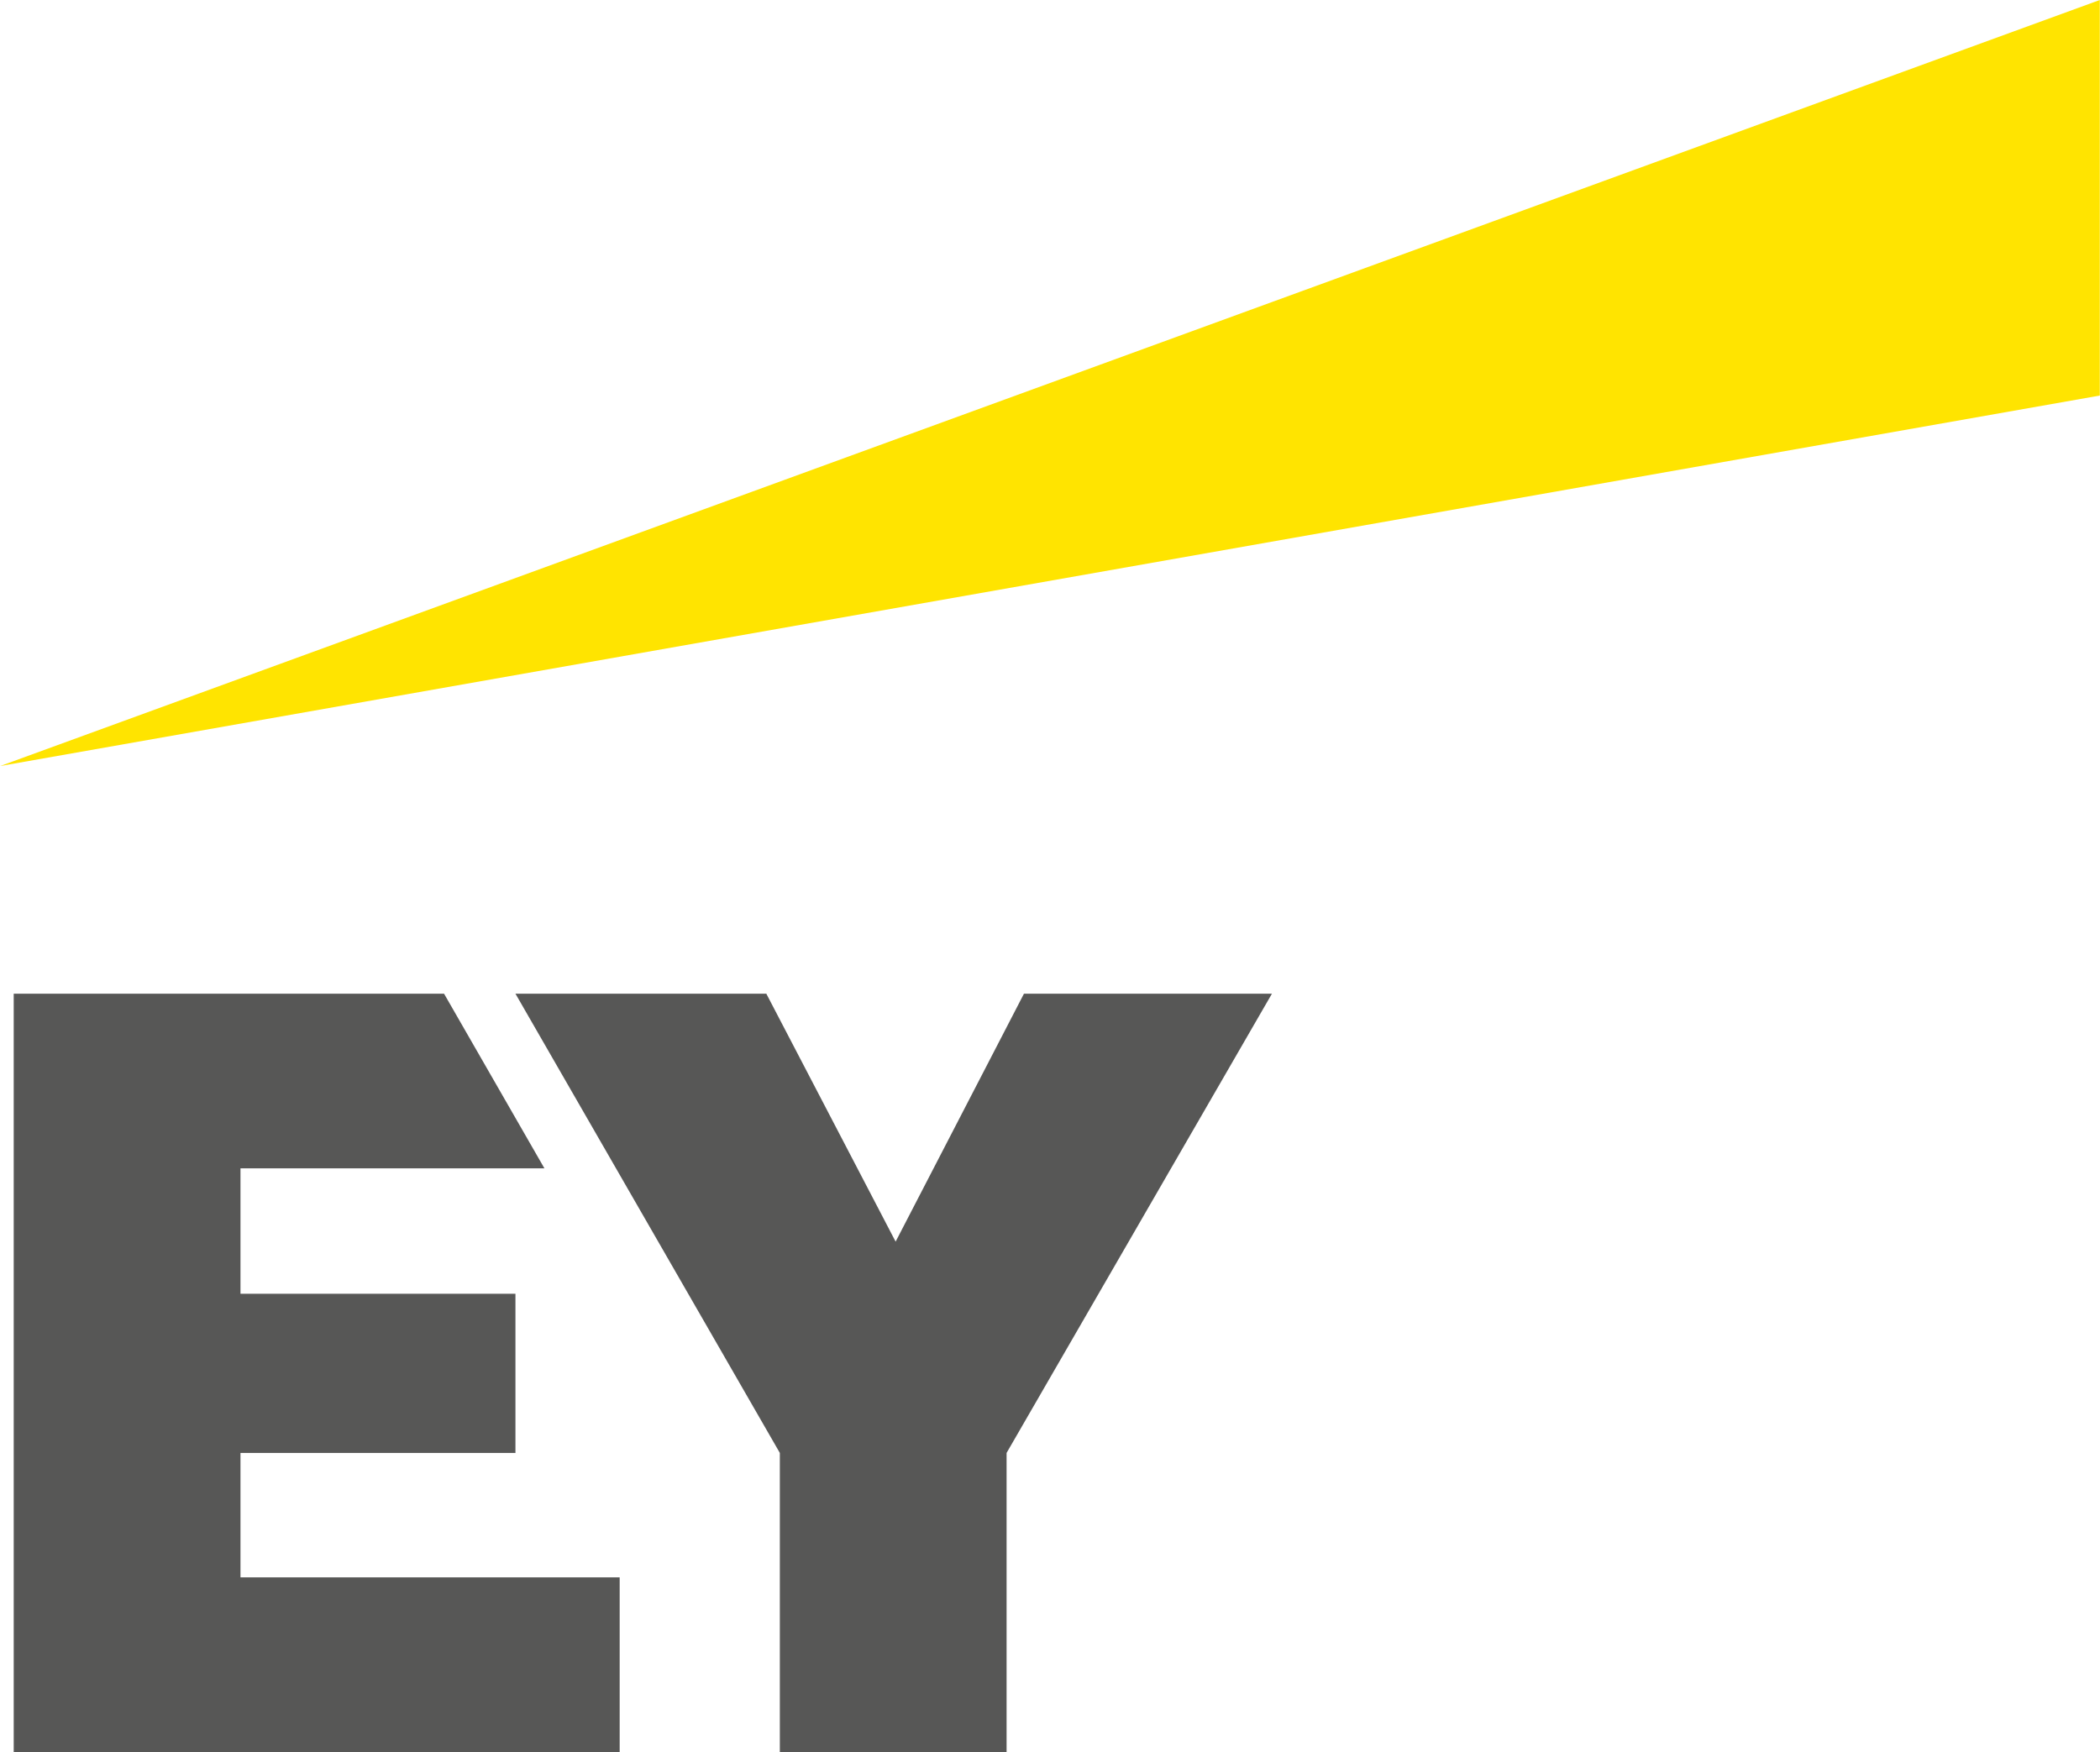 ernst-and-young-logo